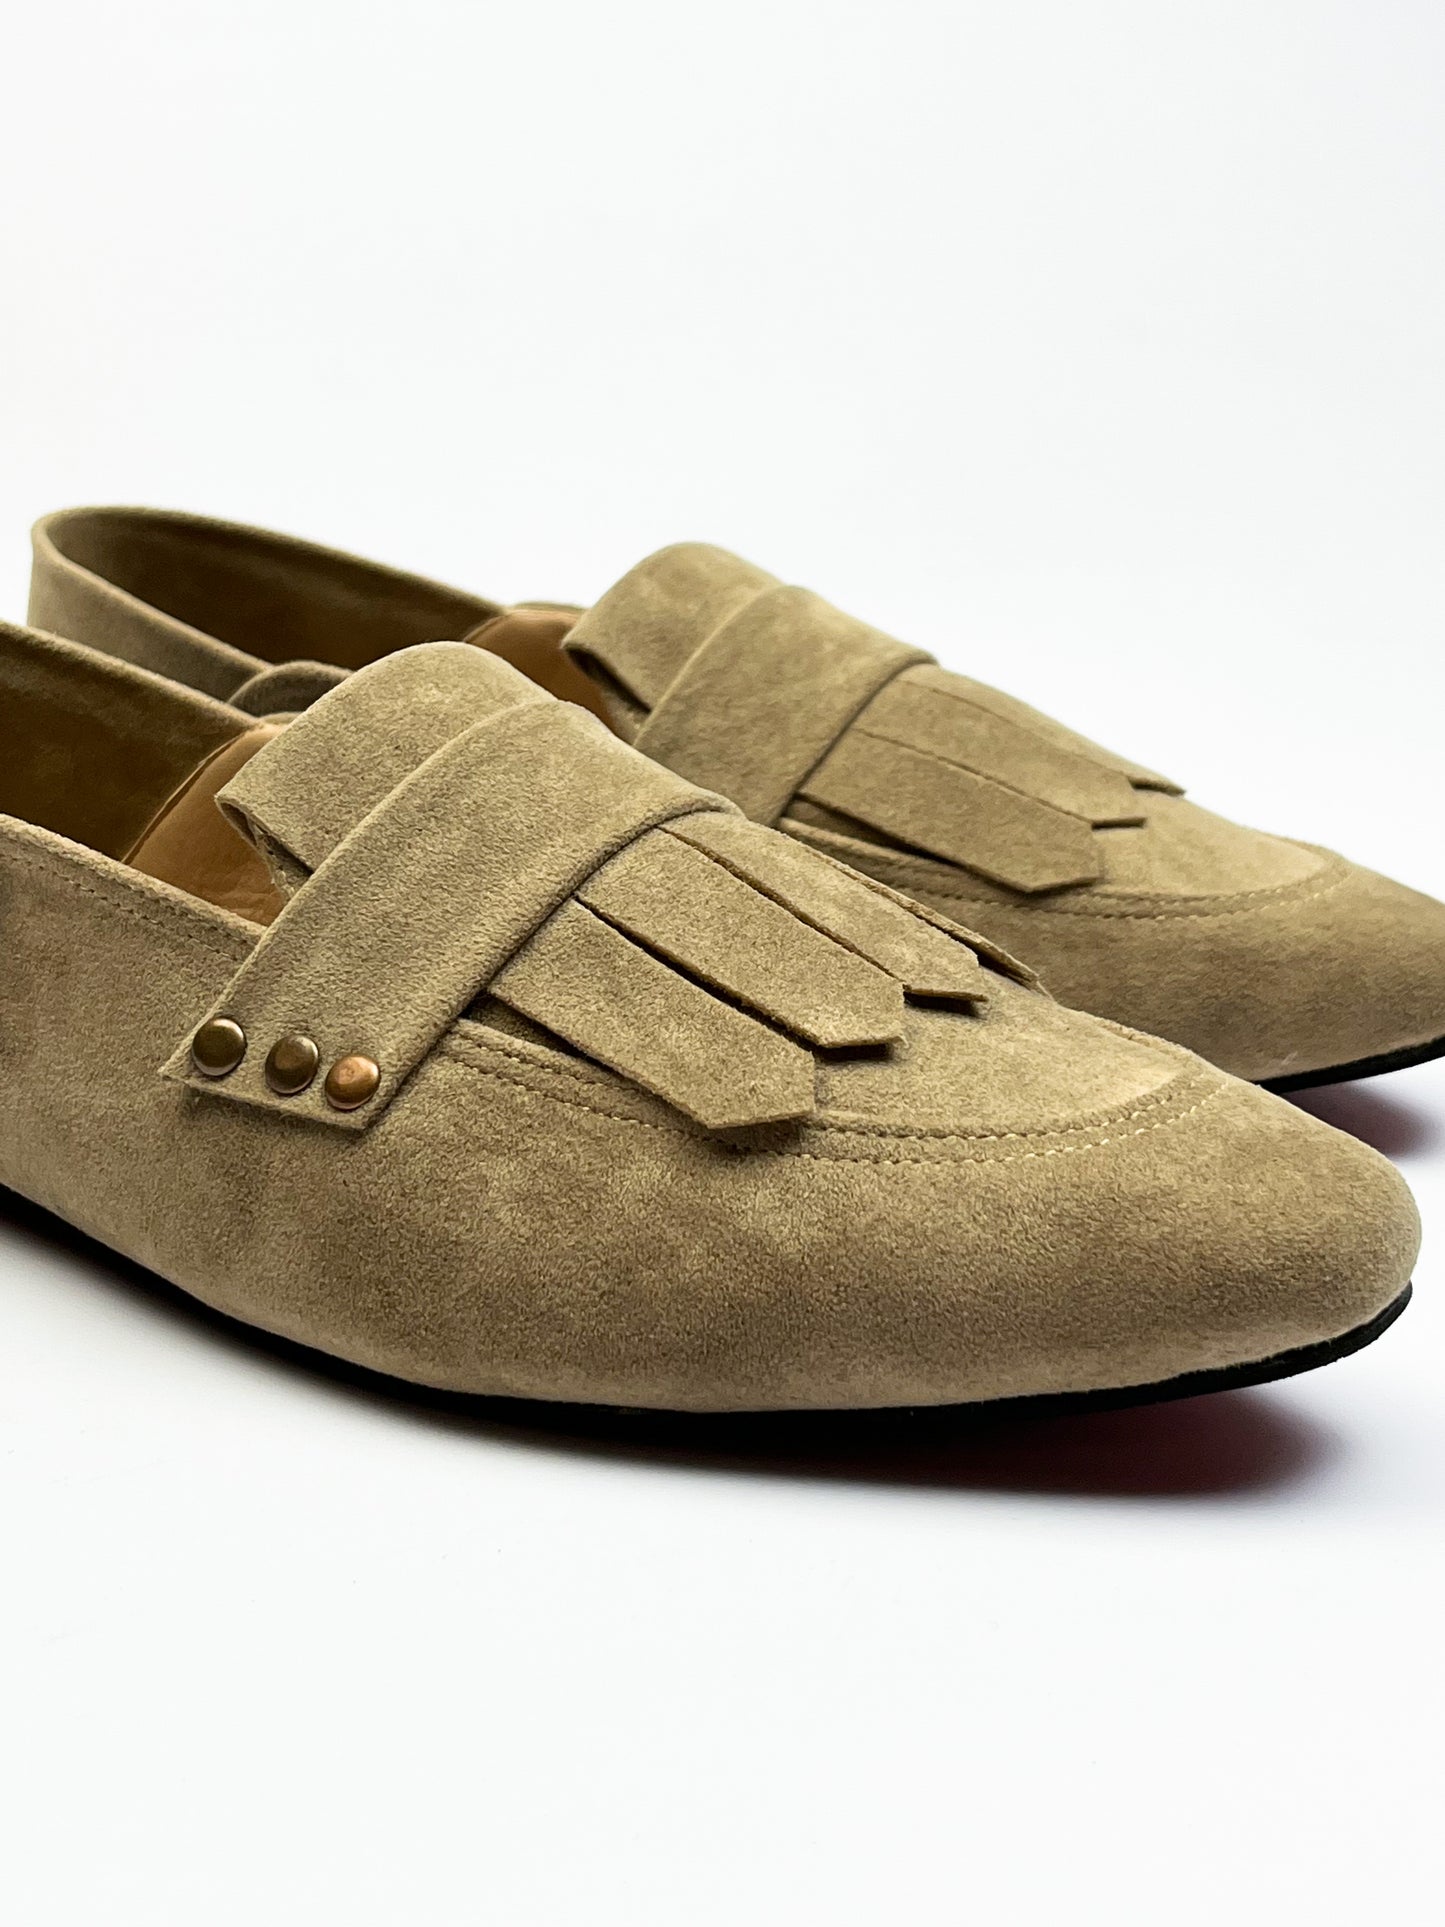 Beige Fringed Square Toe Loafers